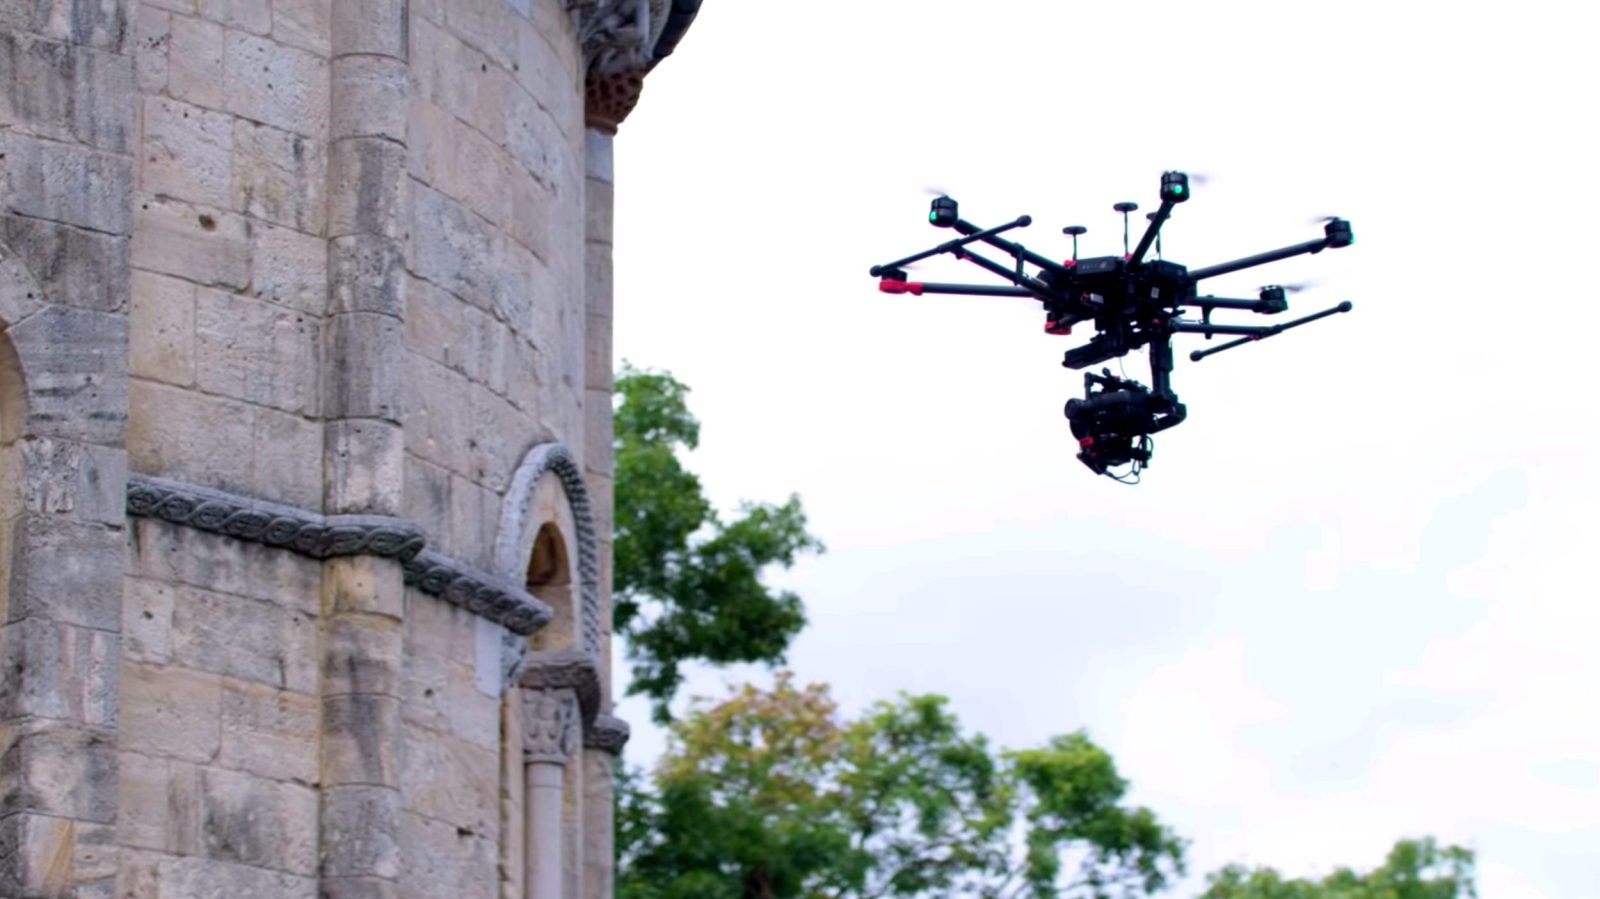 DJI and Hasselblad inspect The Met Cloisters' 12th-century Fuentidueña Apse